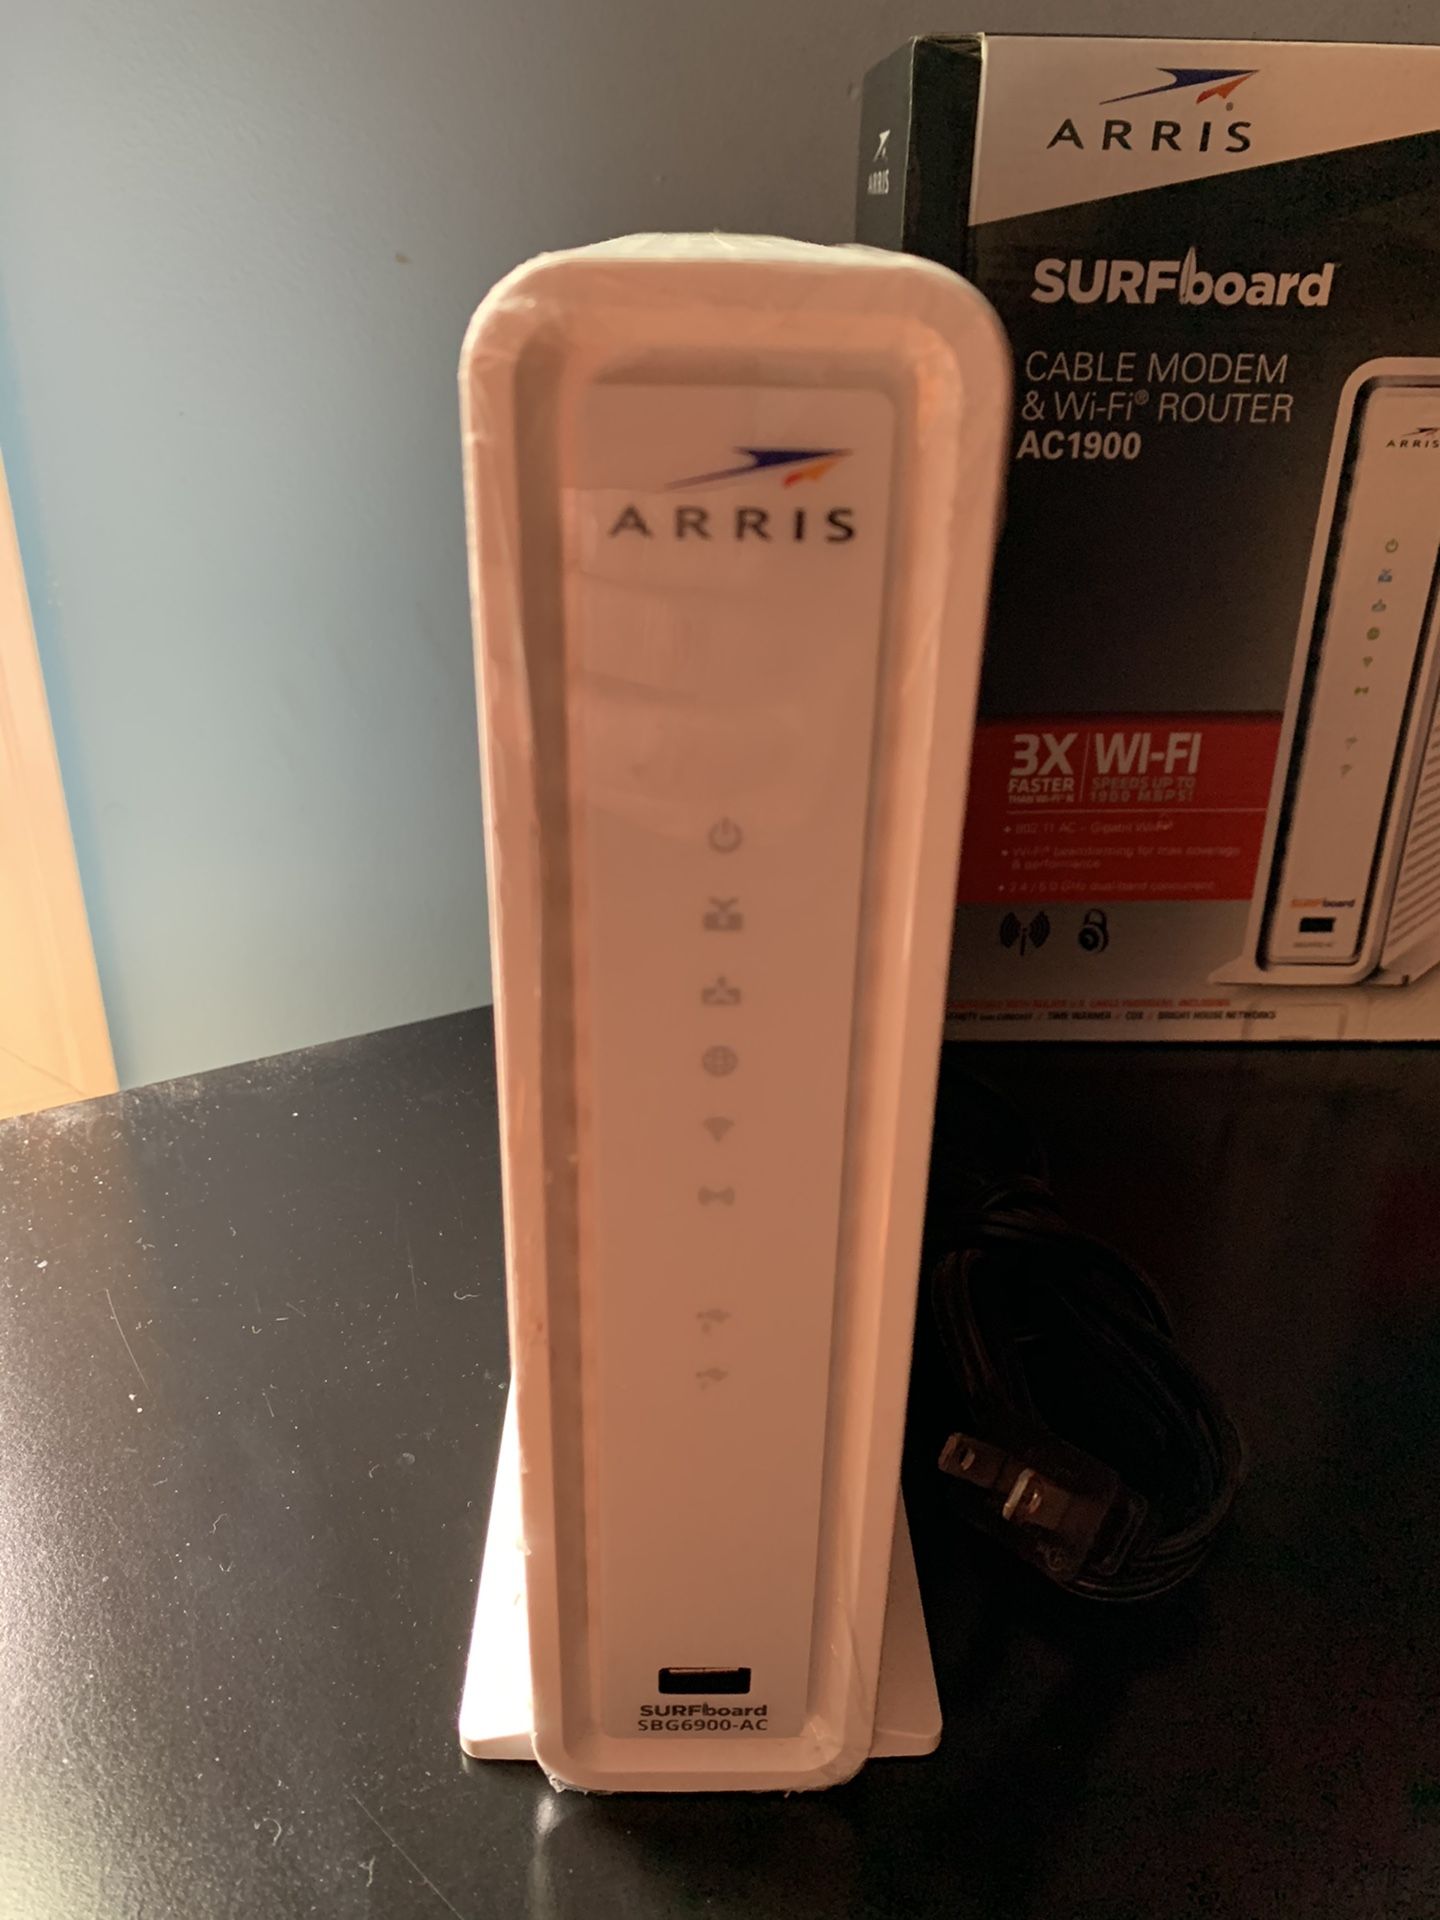 Arris Surfboard Cable Modem & WiFi Router SBG6900 AC1900